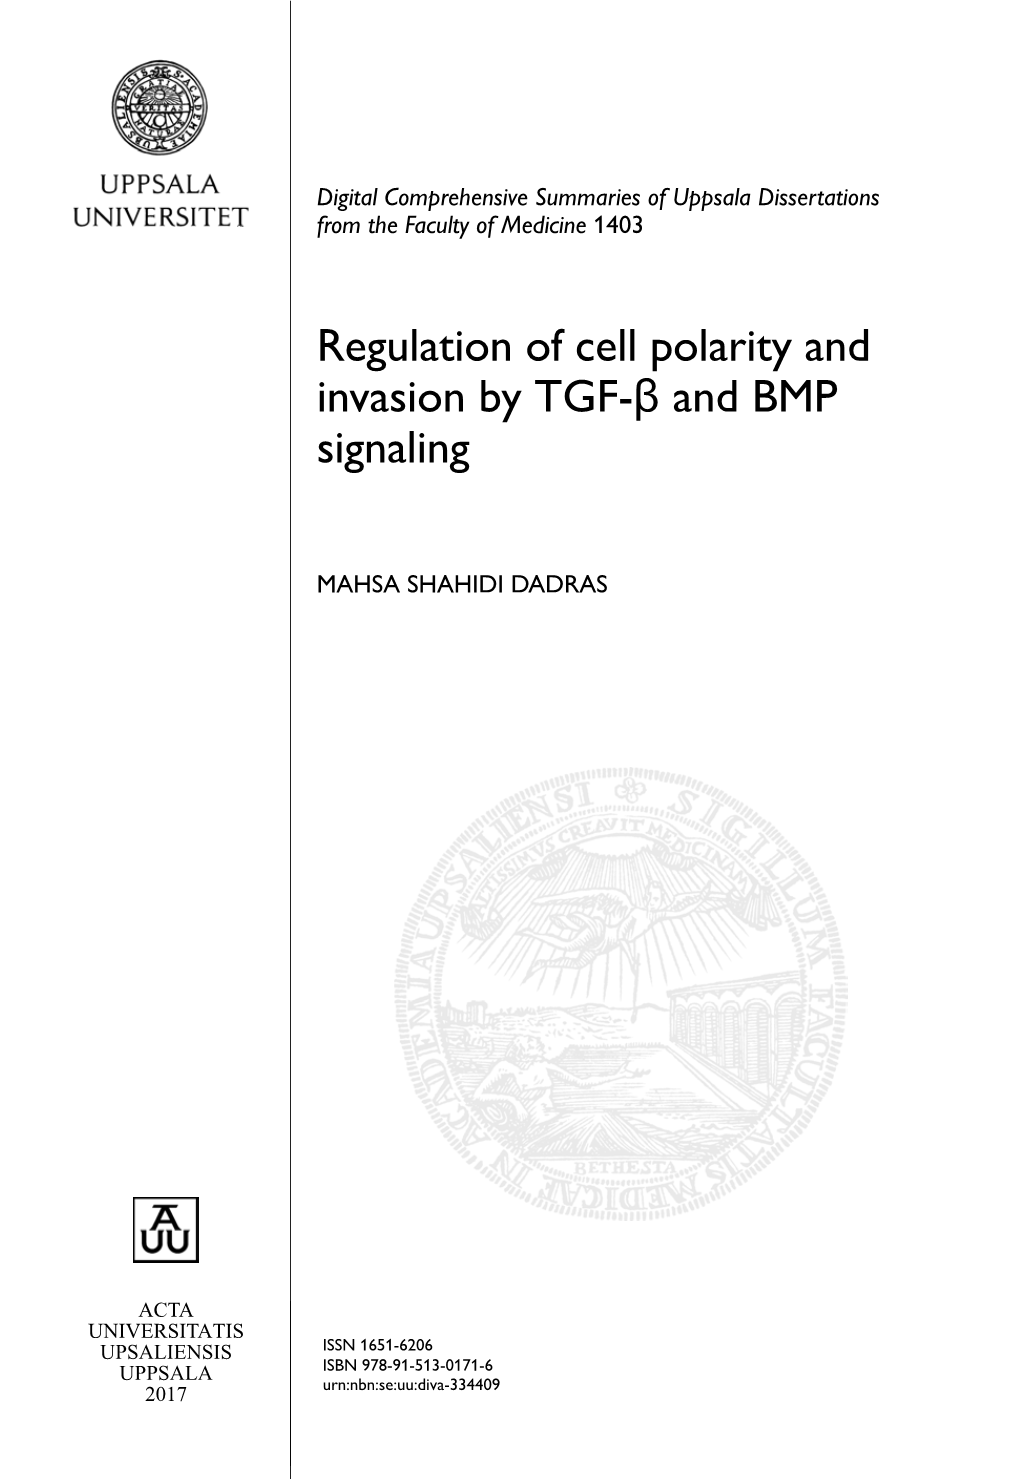 Regulation of Cell Polarity and Invasion by TGF-Β and BMP Signaling